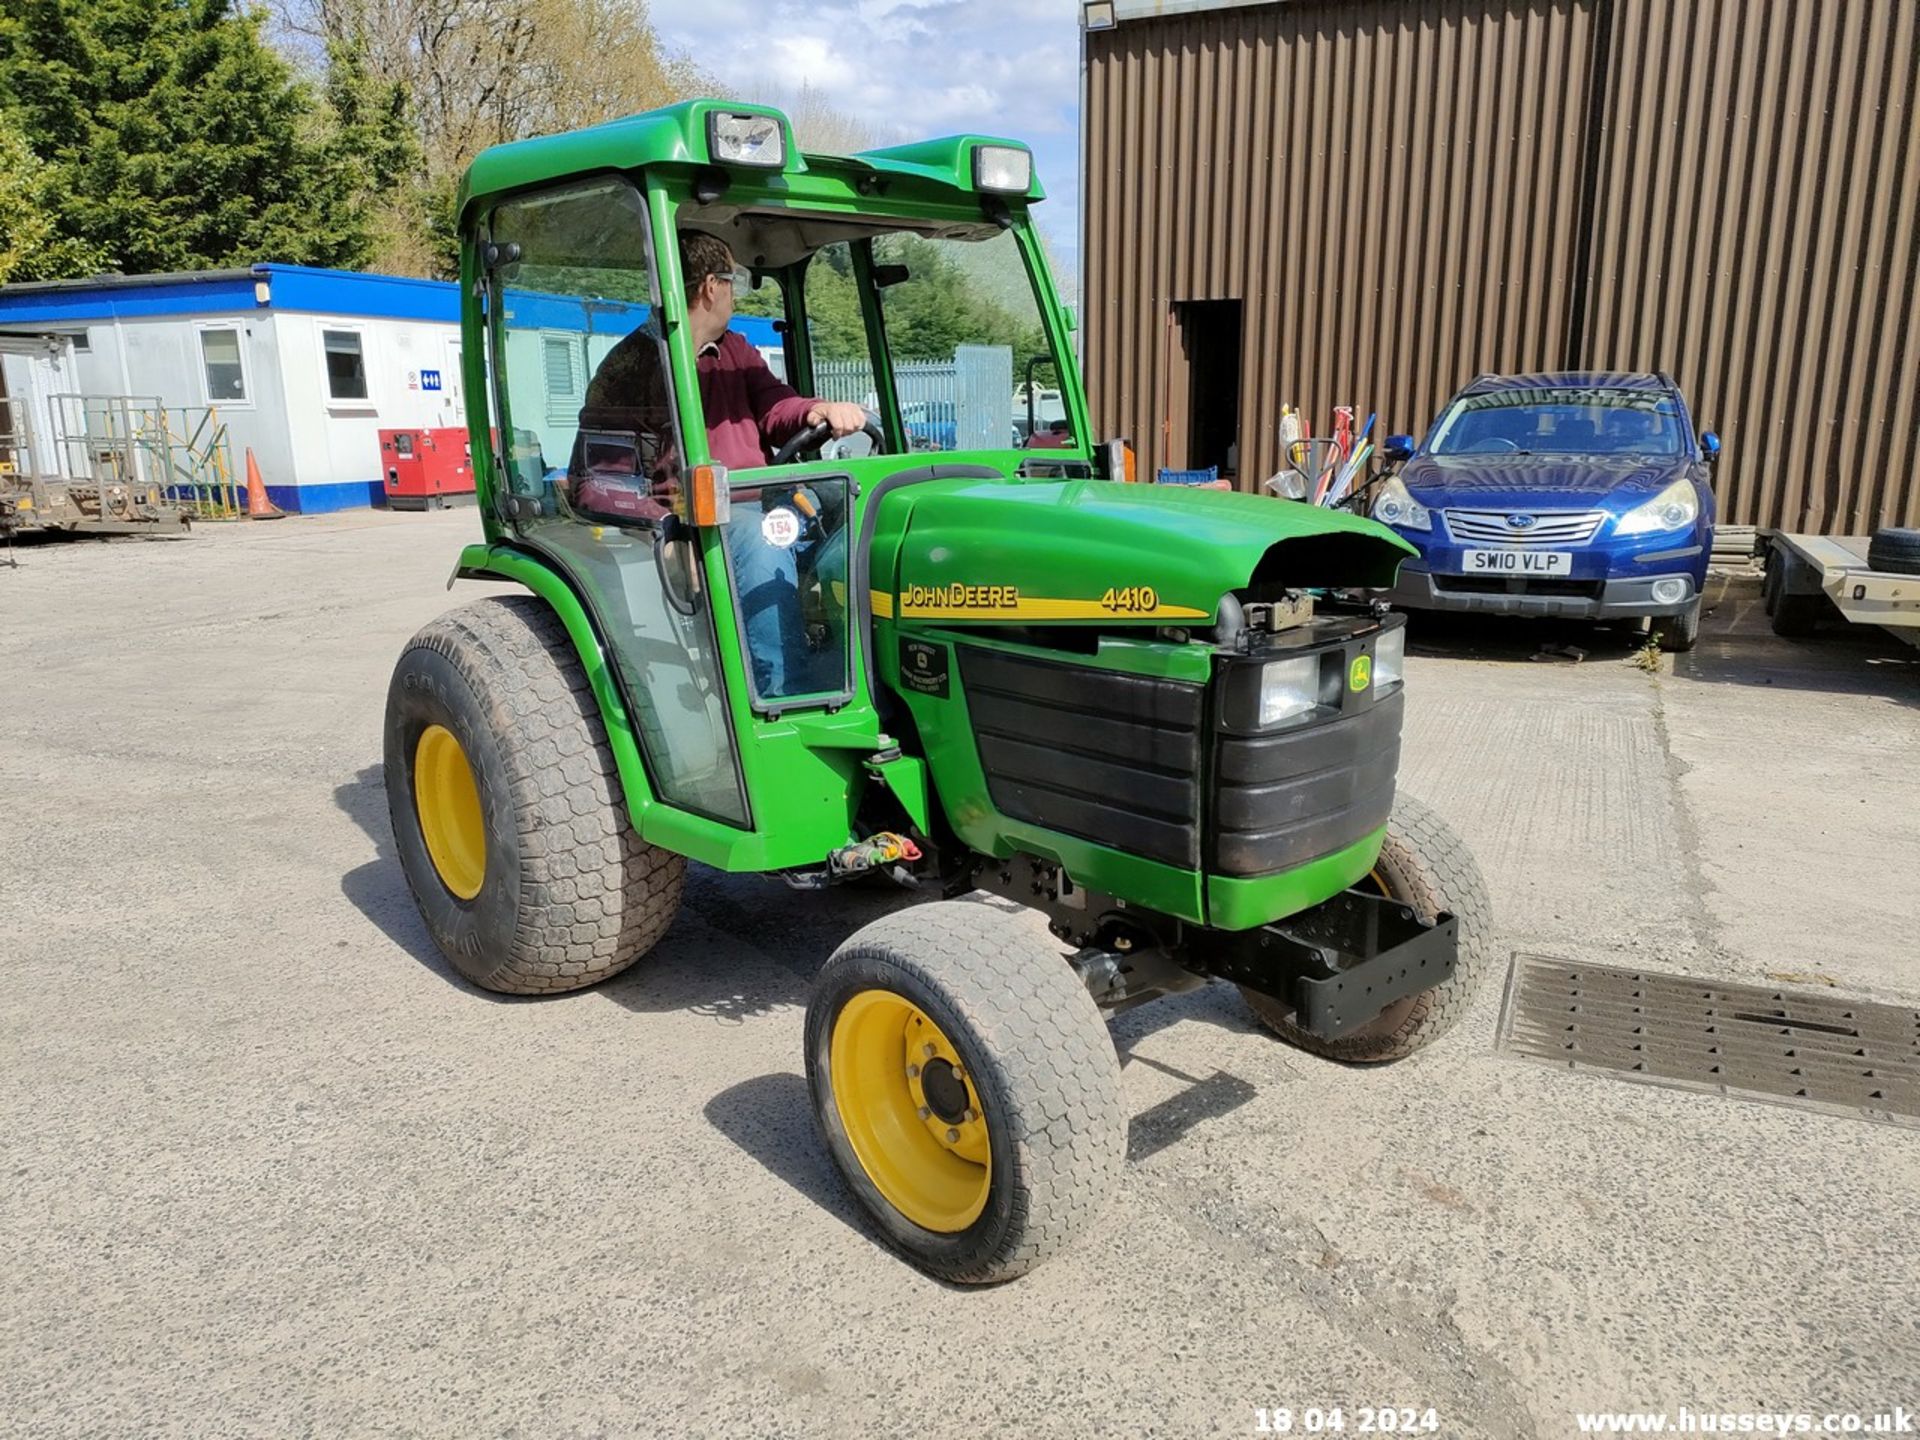 JOHN DEERE 4410 35HP TRACTOR 5410HRS SHUTTLE BRAKES NEED ATTENTION, NO FRONT WNDSCREEN - Image 9 of 18